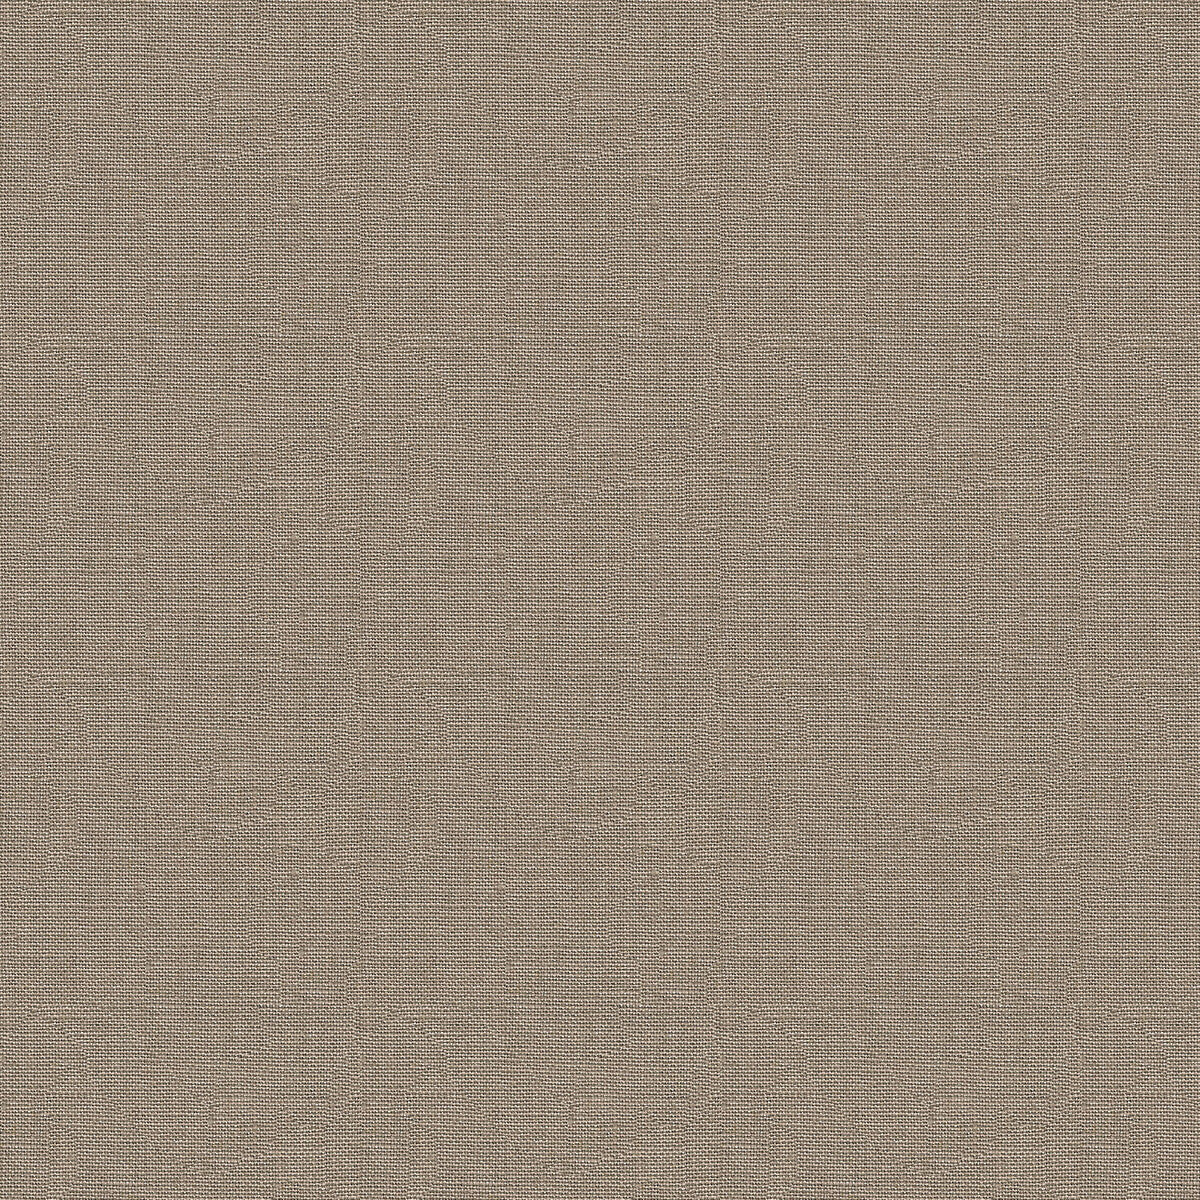 Stone Harbor fabric in oats color - pattern 27591.11.0 - by Kravet Basics in the Perfect Plains collection